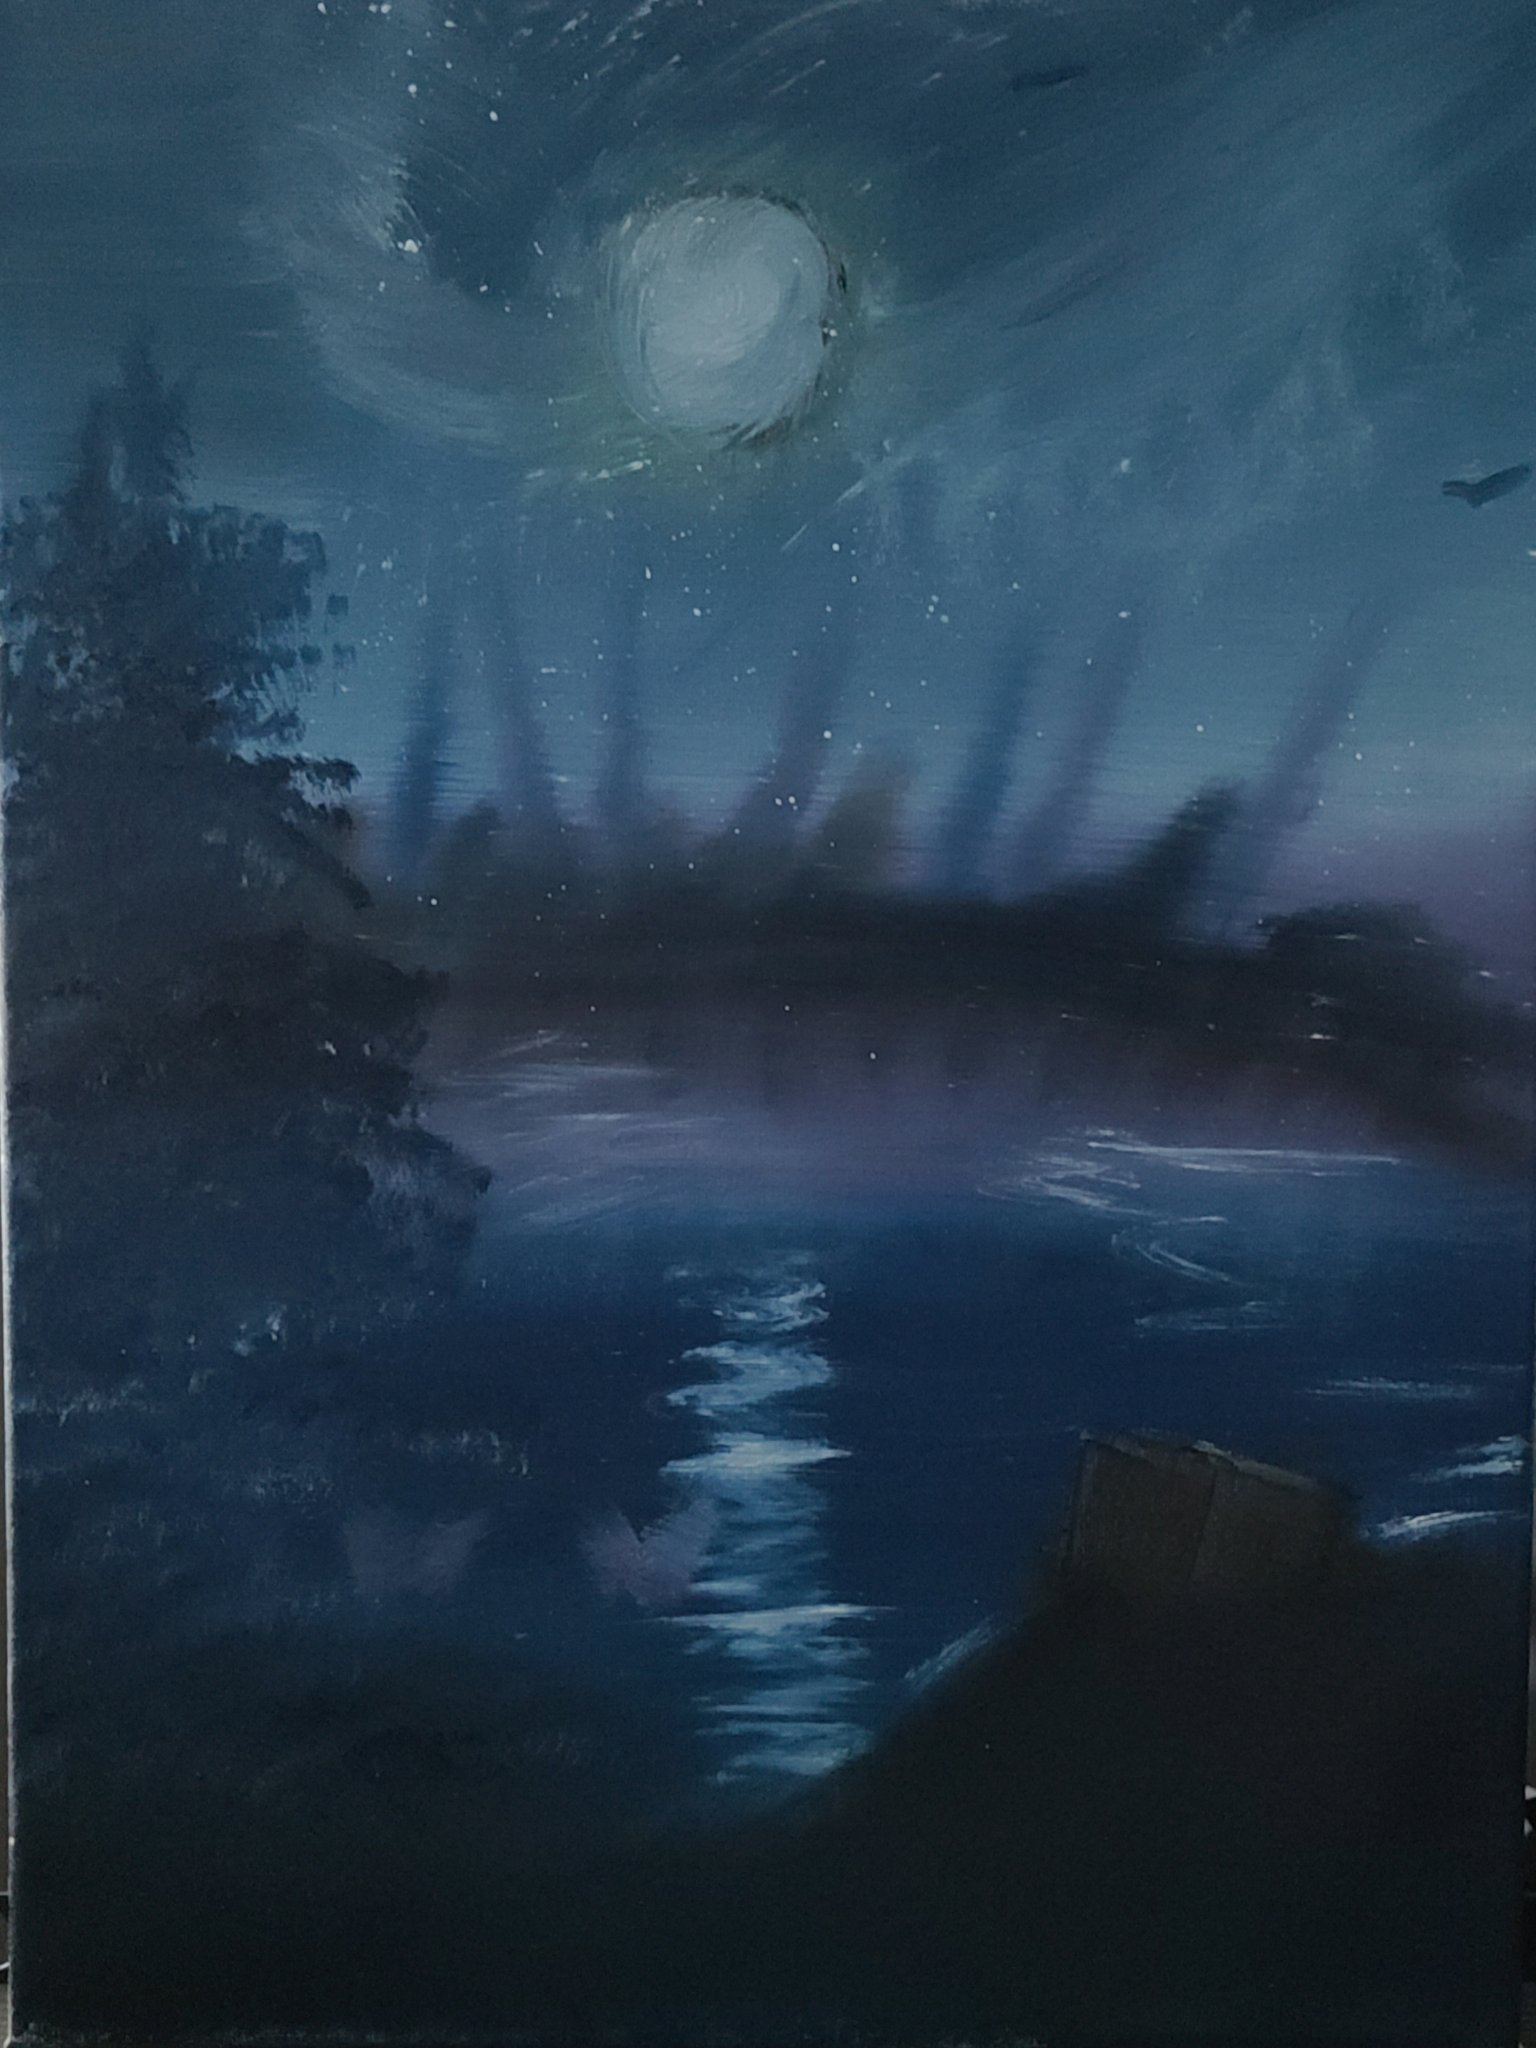 Just began painting to help my anxiety - meme